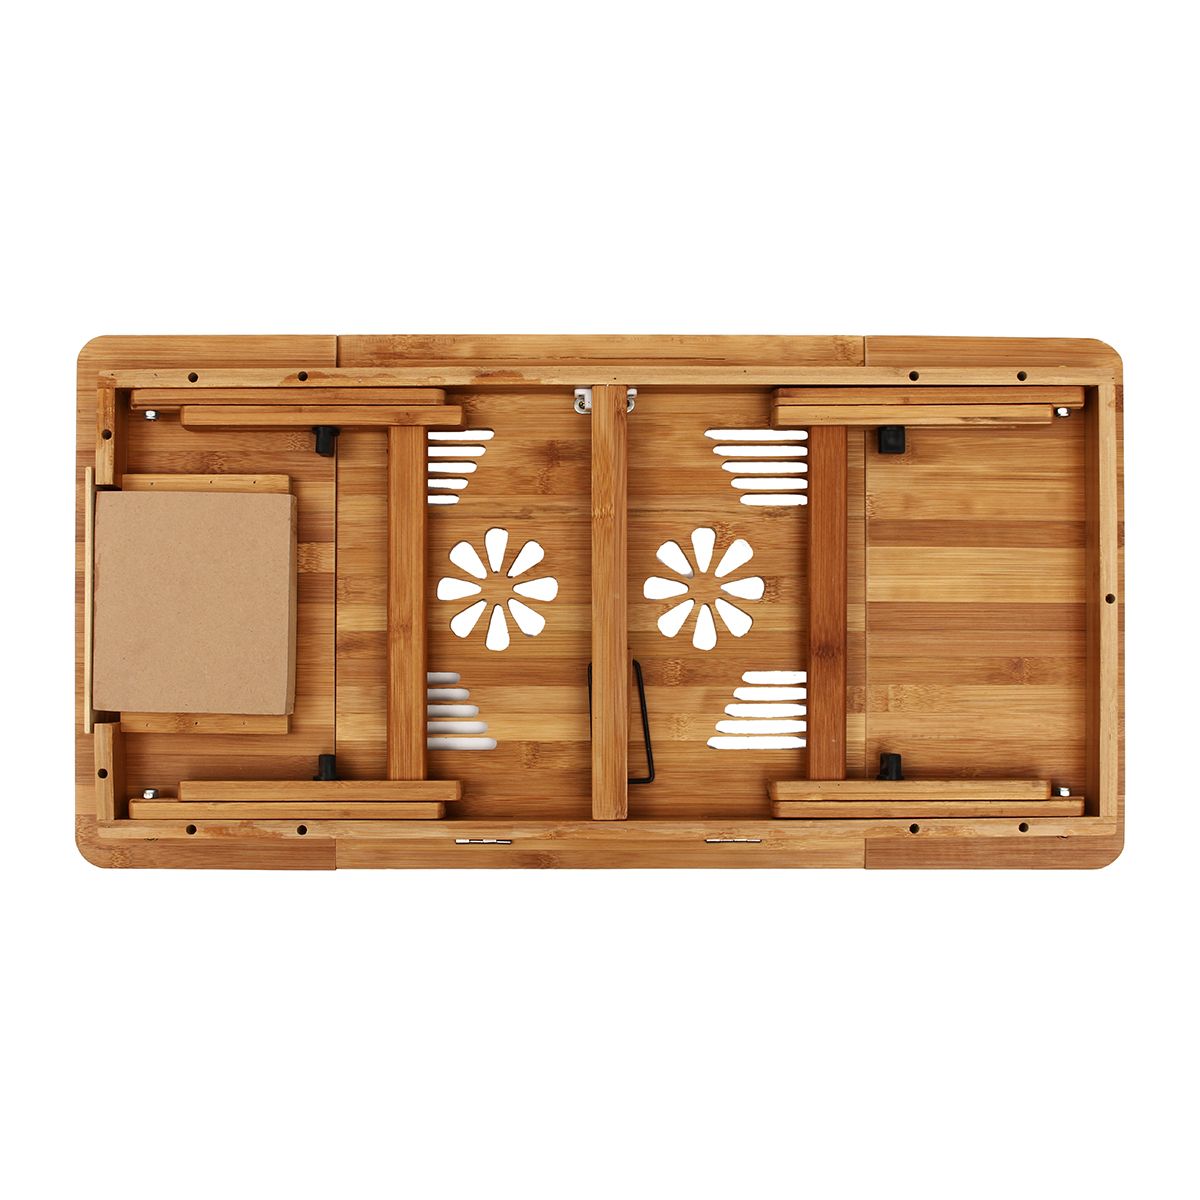 50X30x4cm-Adjustable-Foldable-Laptop-PC-Desk-Portable-Bamboo-Bed-Notebook-Table-Holder-1598903